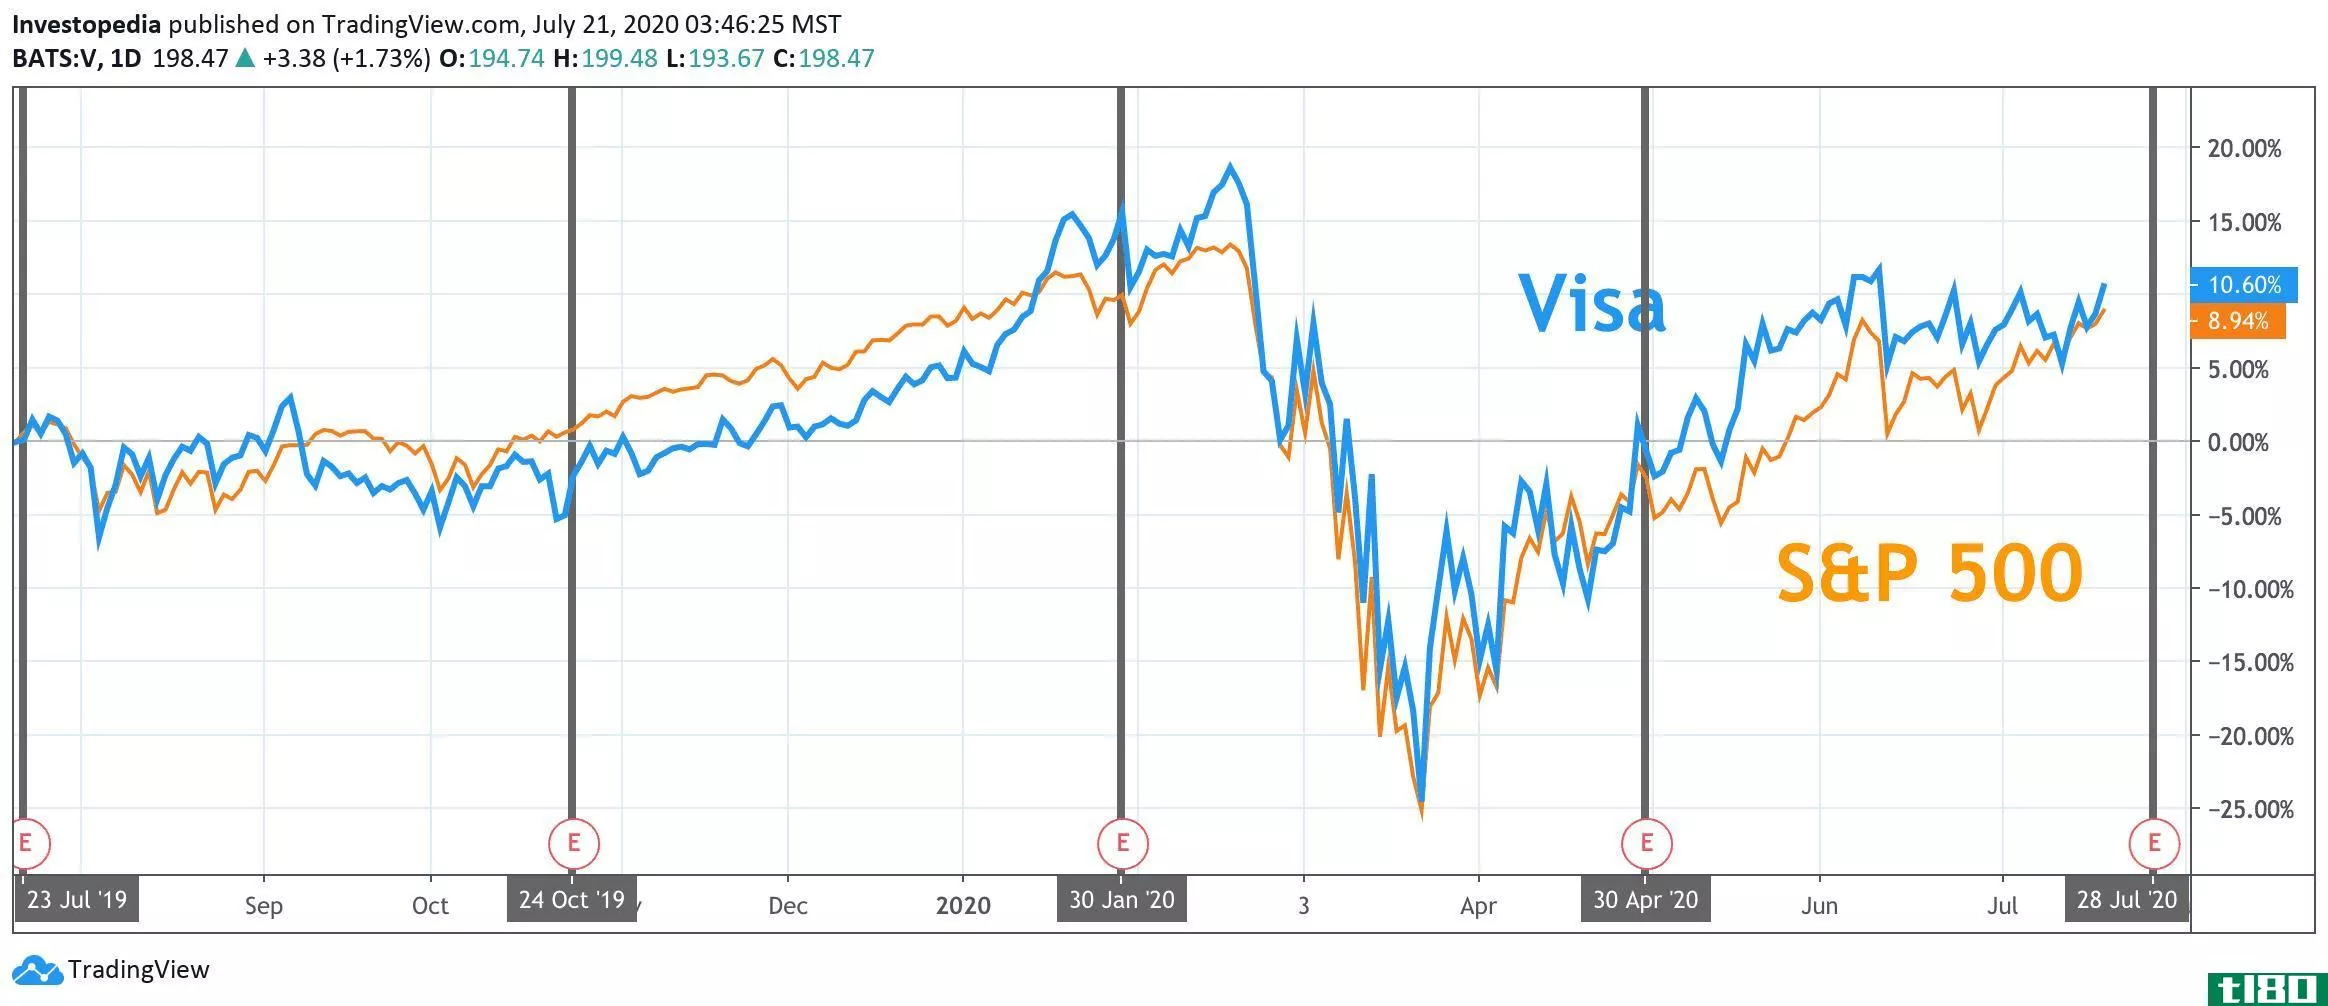 One Year Total Return for S&P 500 and Visa